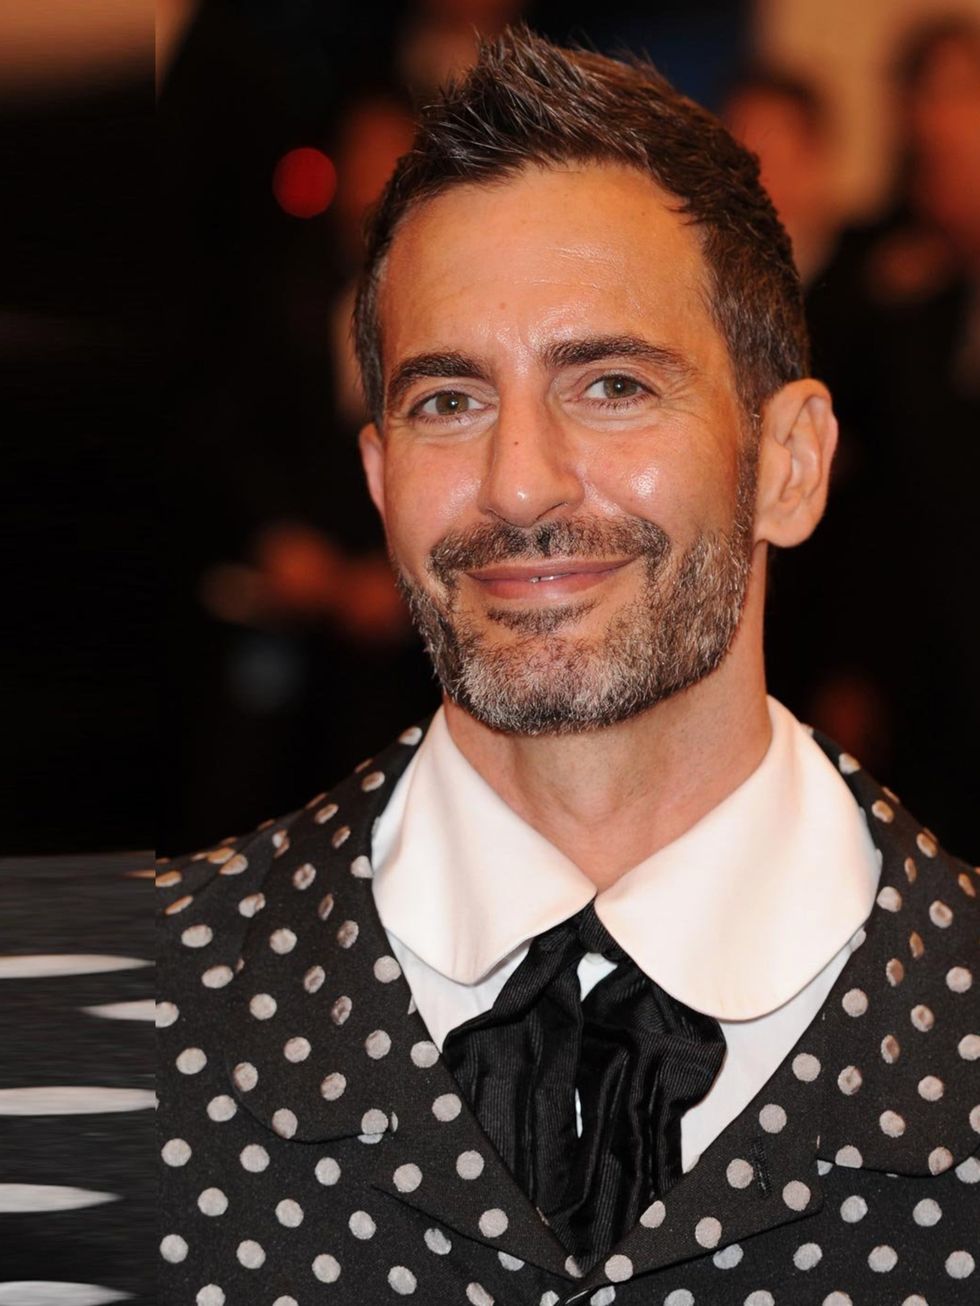 <p>Marc Jacobs at the Costume Institute Gala Benefit celebrating the Punk: Chaos To Couture exhibition New York, May 2013.</p>